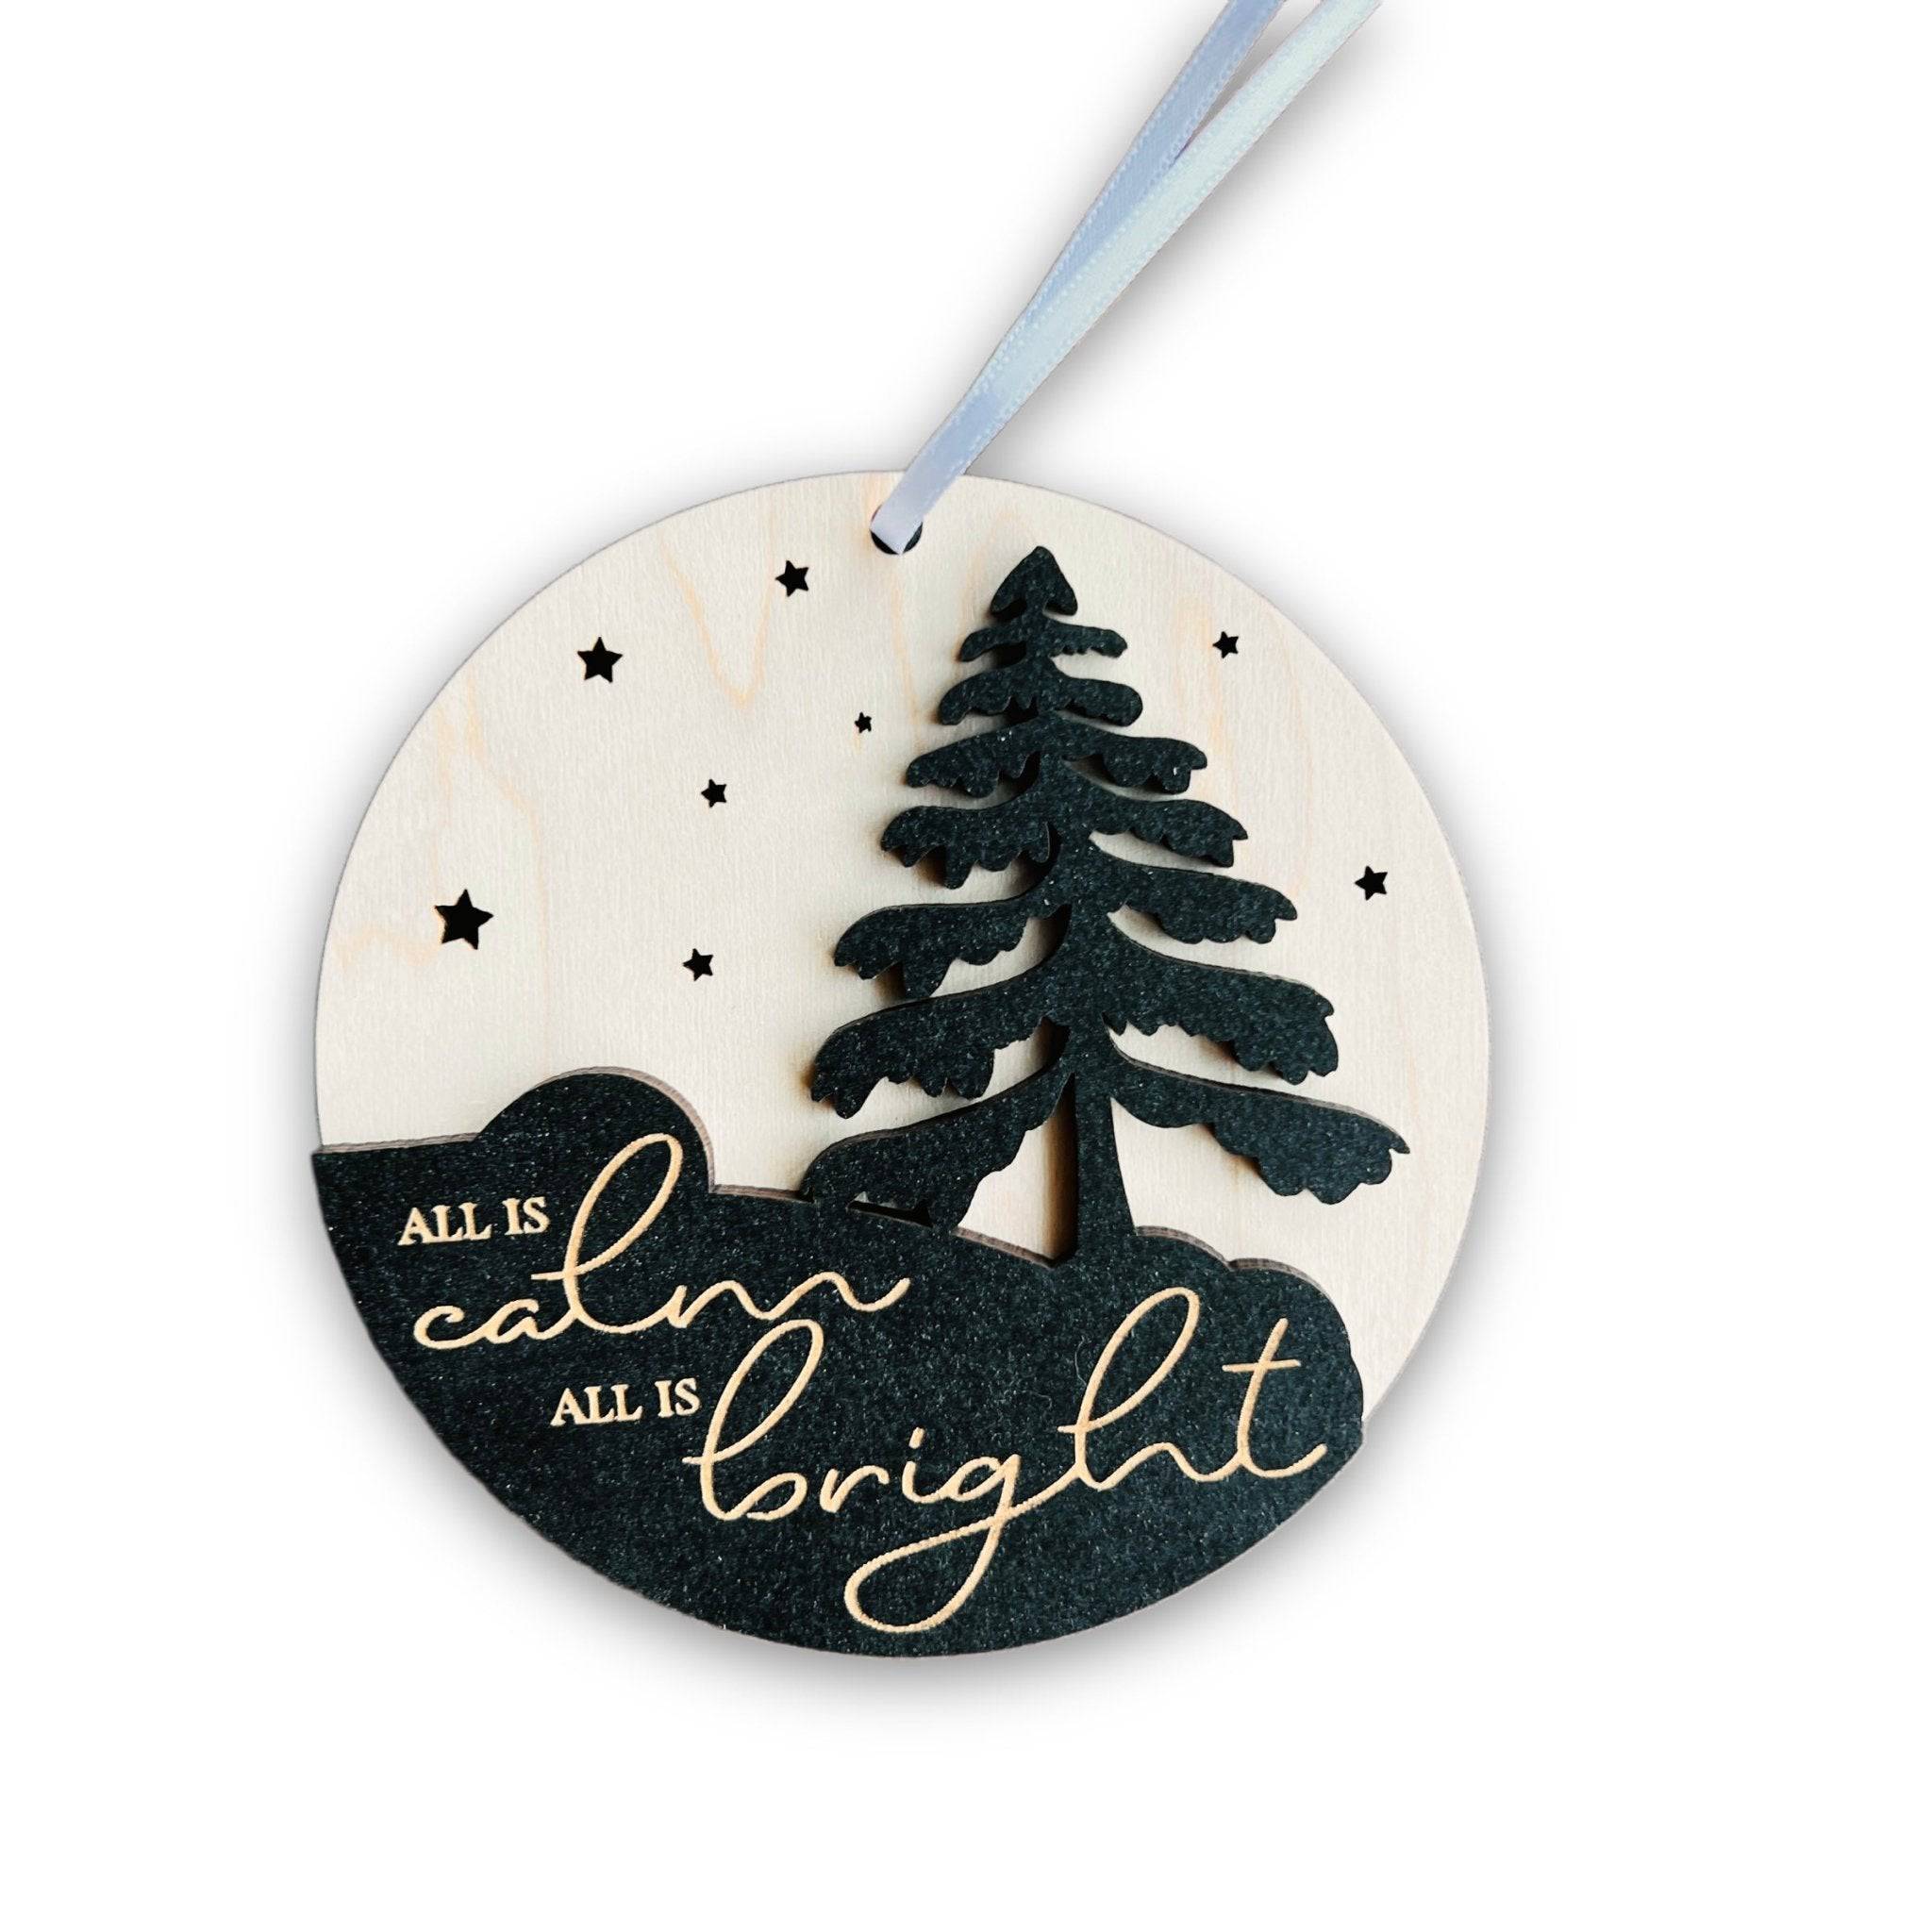 All is Calm All is Bright Ornament - Sticks & Doodles